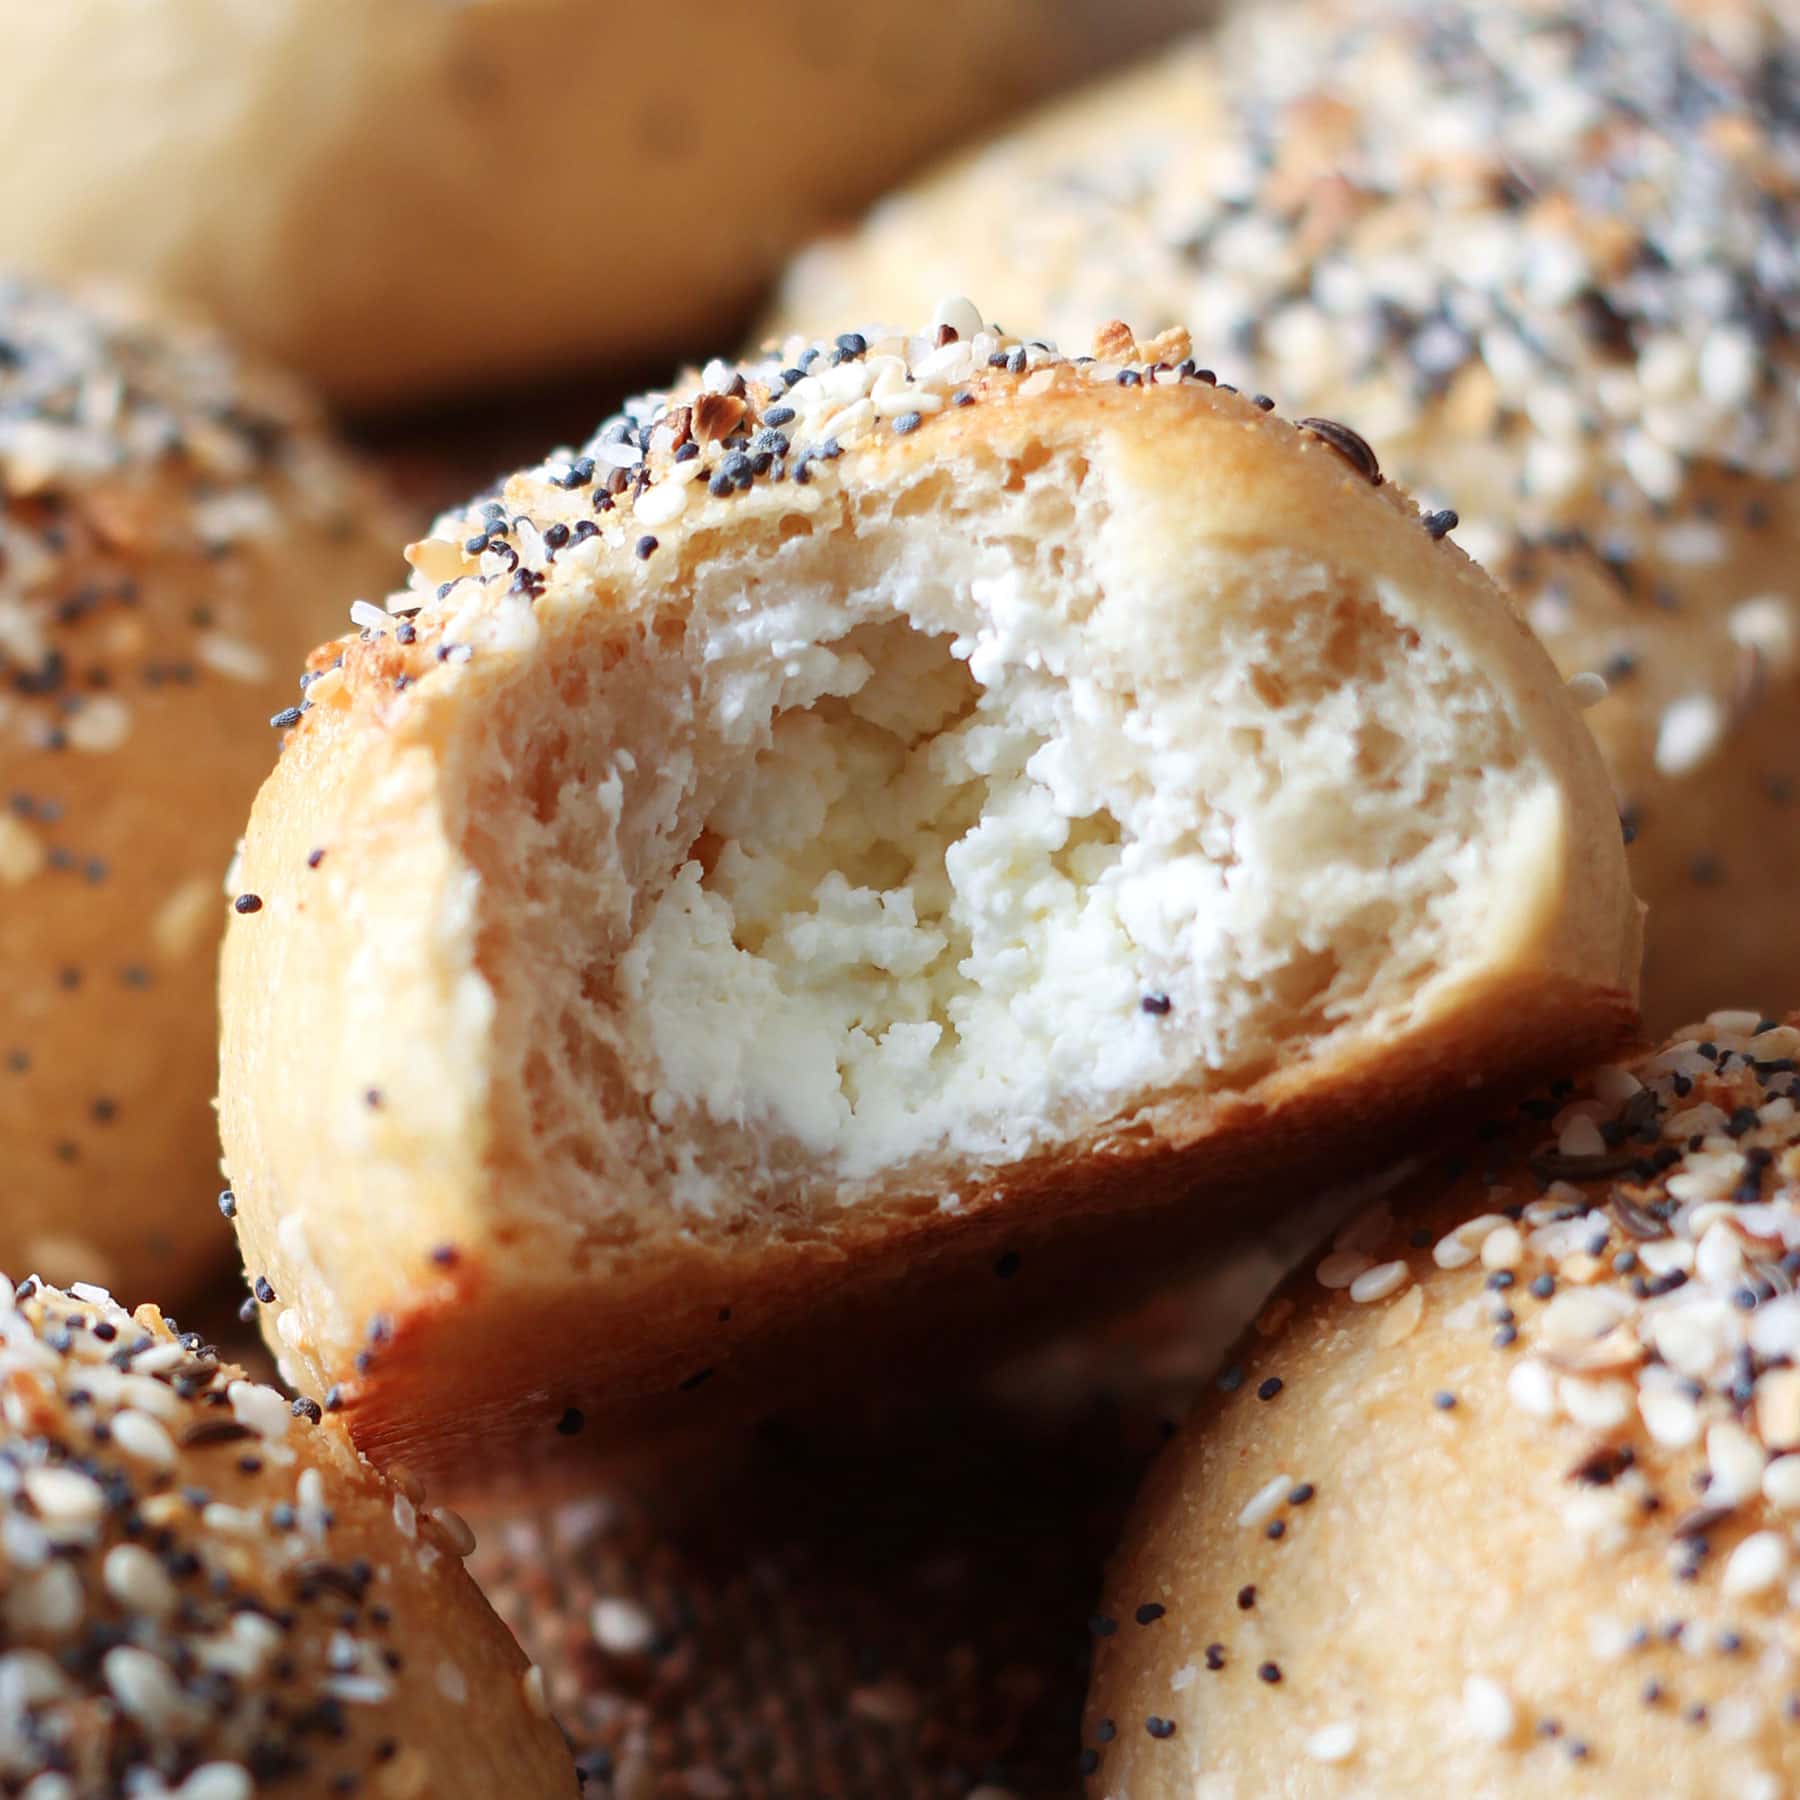 How to Make Bagel Bombs